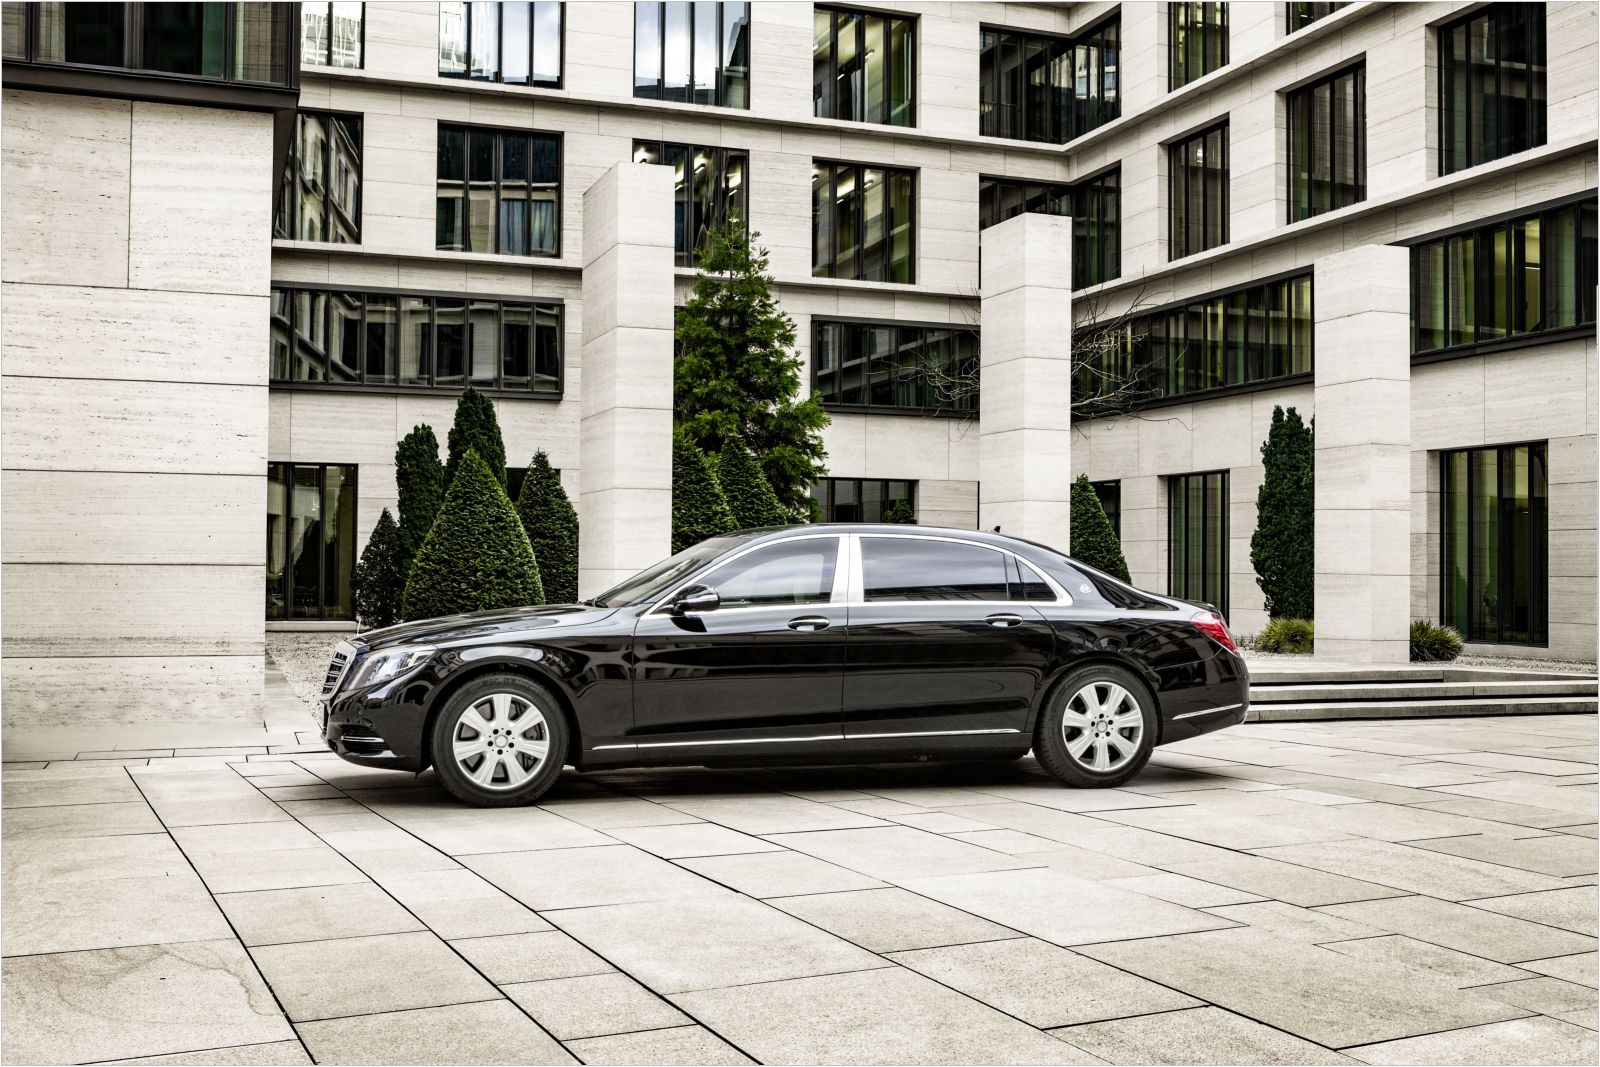 Mercedes-Benz S600 Maybach Guard, 1600x1067px, img-3